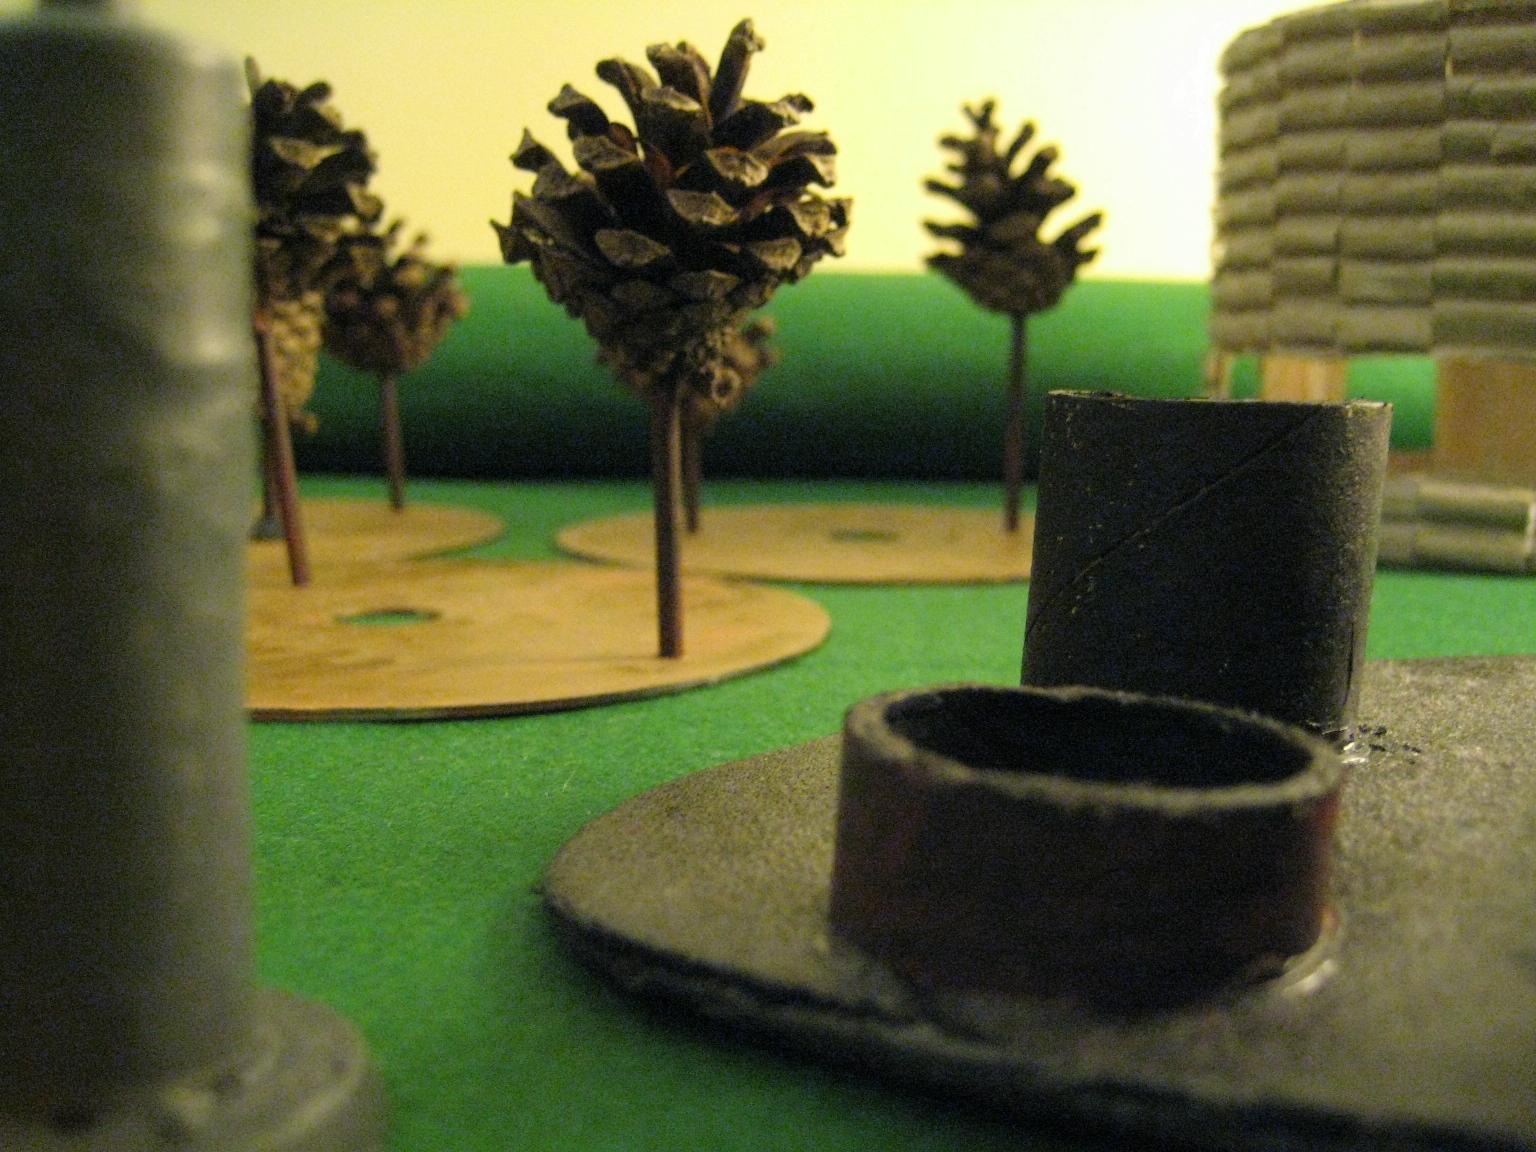 Bastions, Minefields, Piping, Terrain